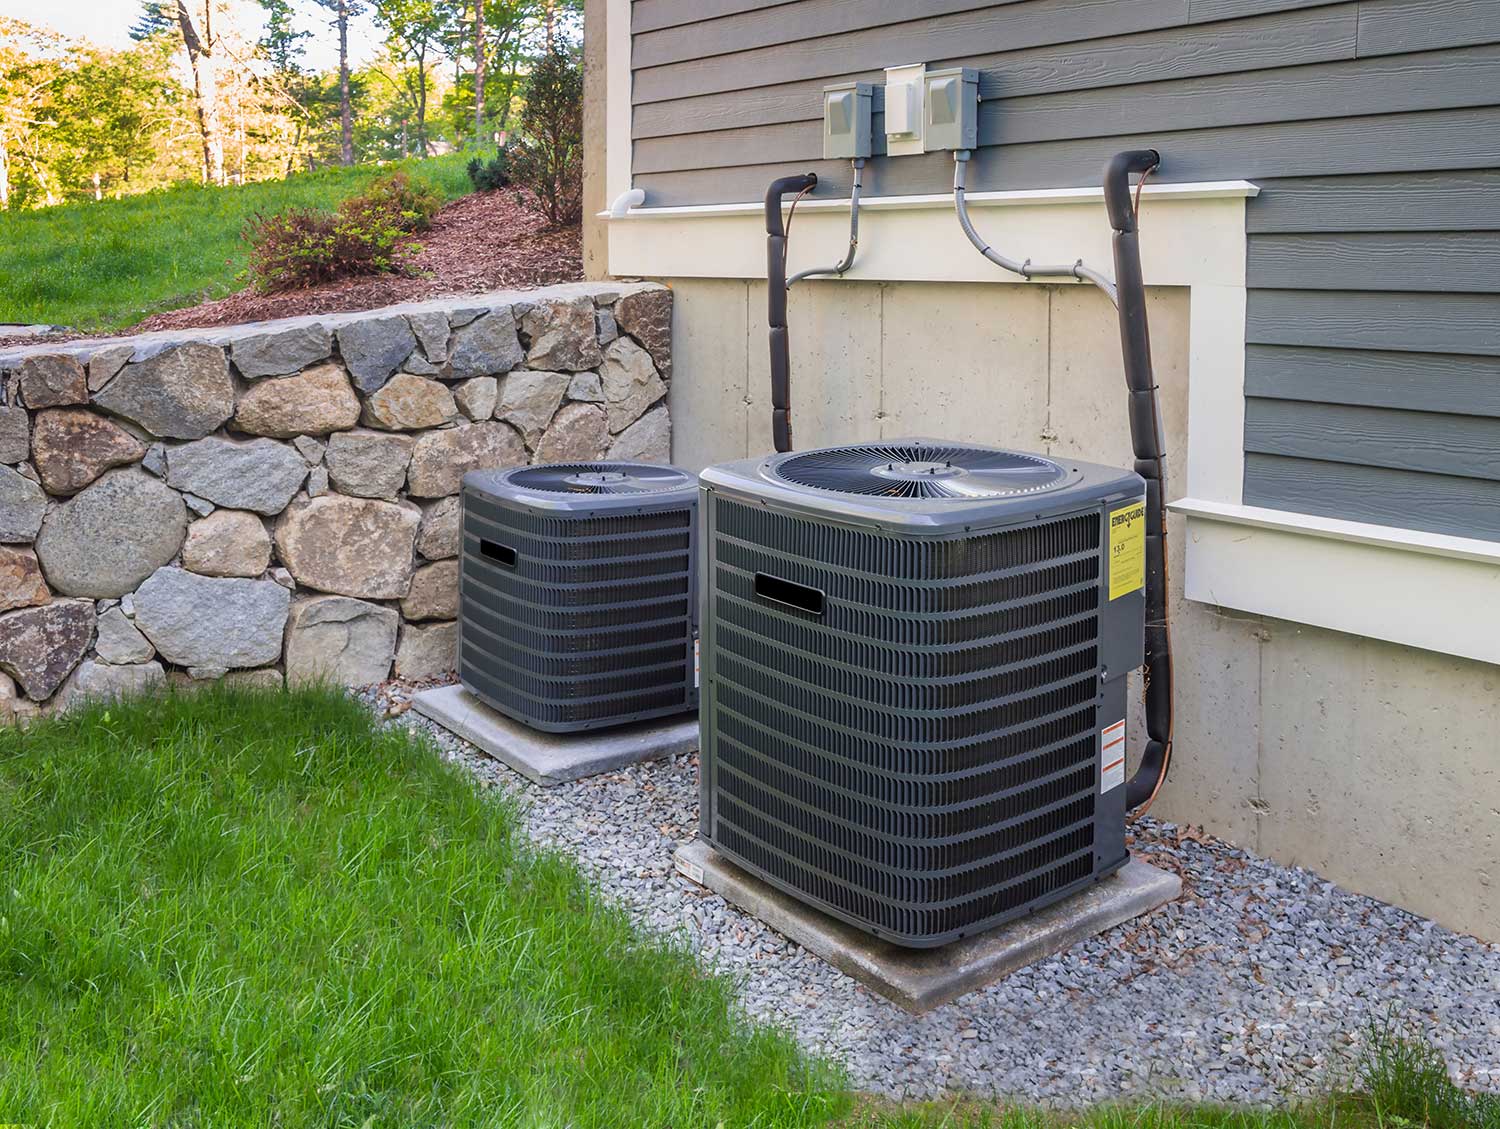 Tips to find a good Heating, Ventilation, plus A/C company when you move